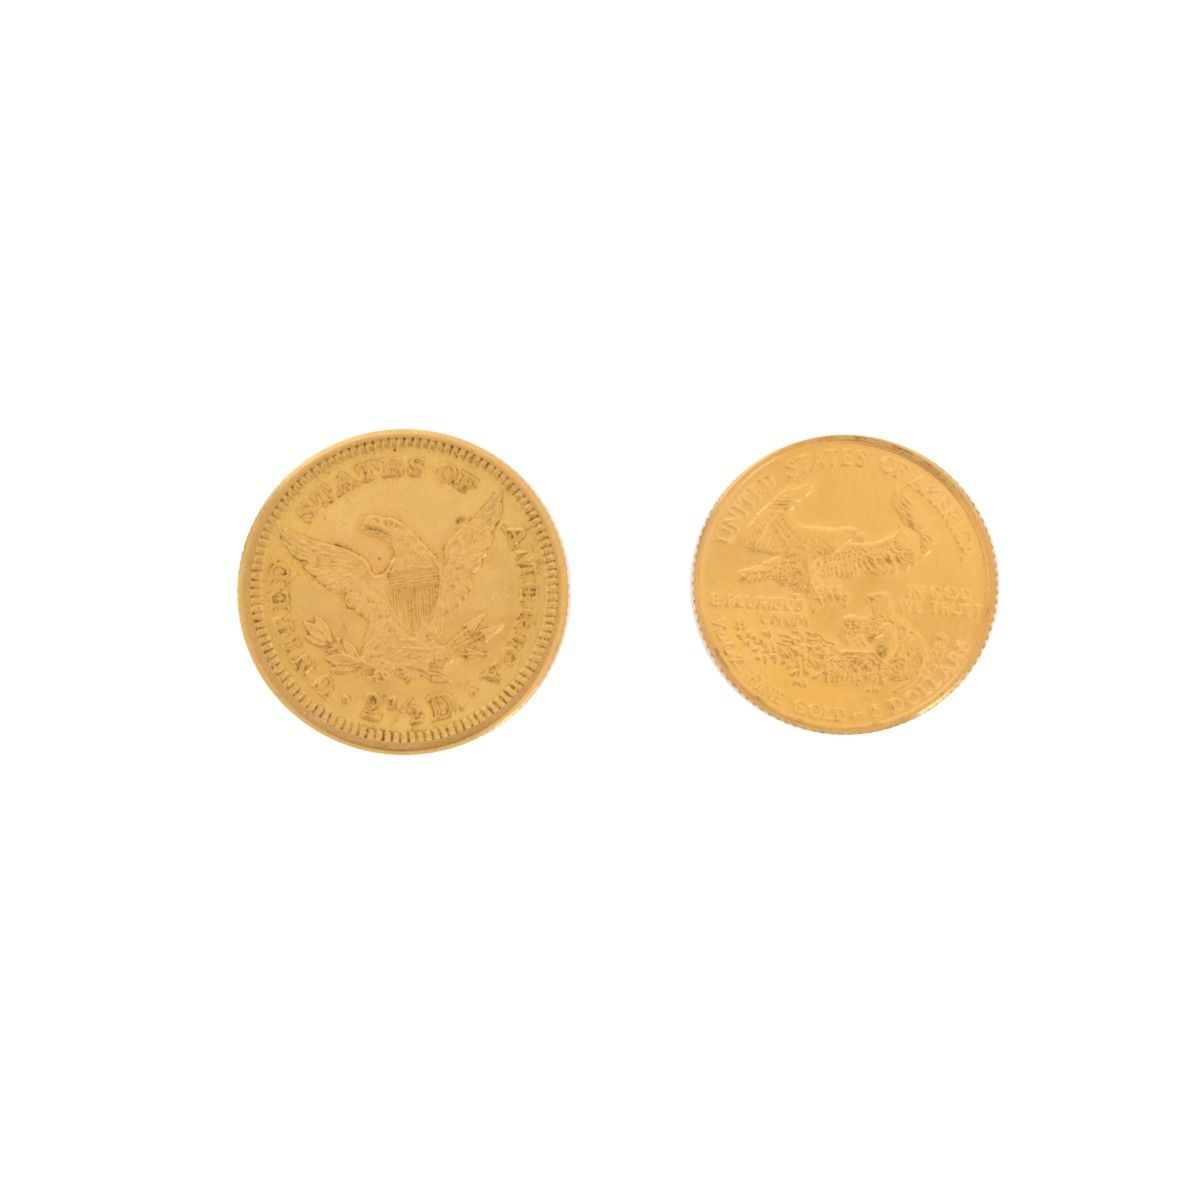 US Gold Coins